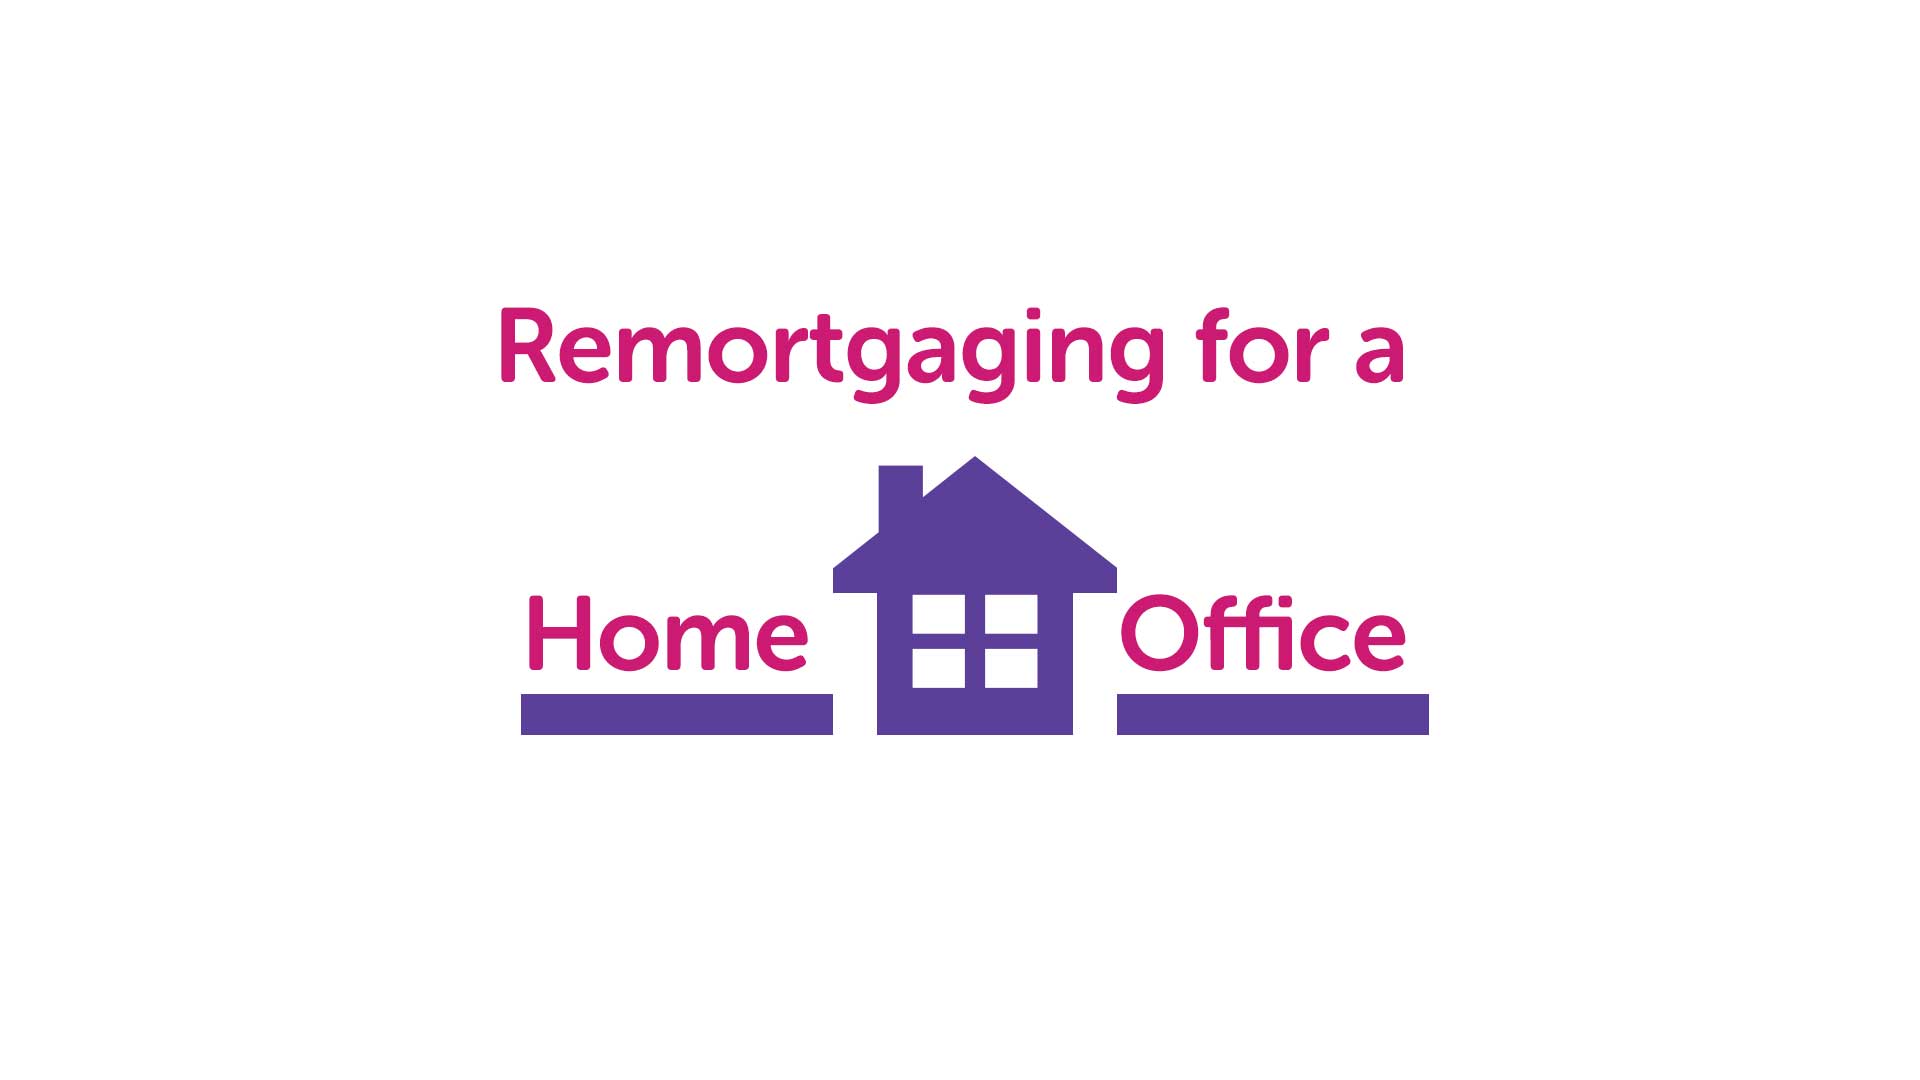 Remortgage for a Home Office in Grimsby